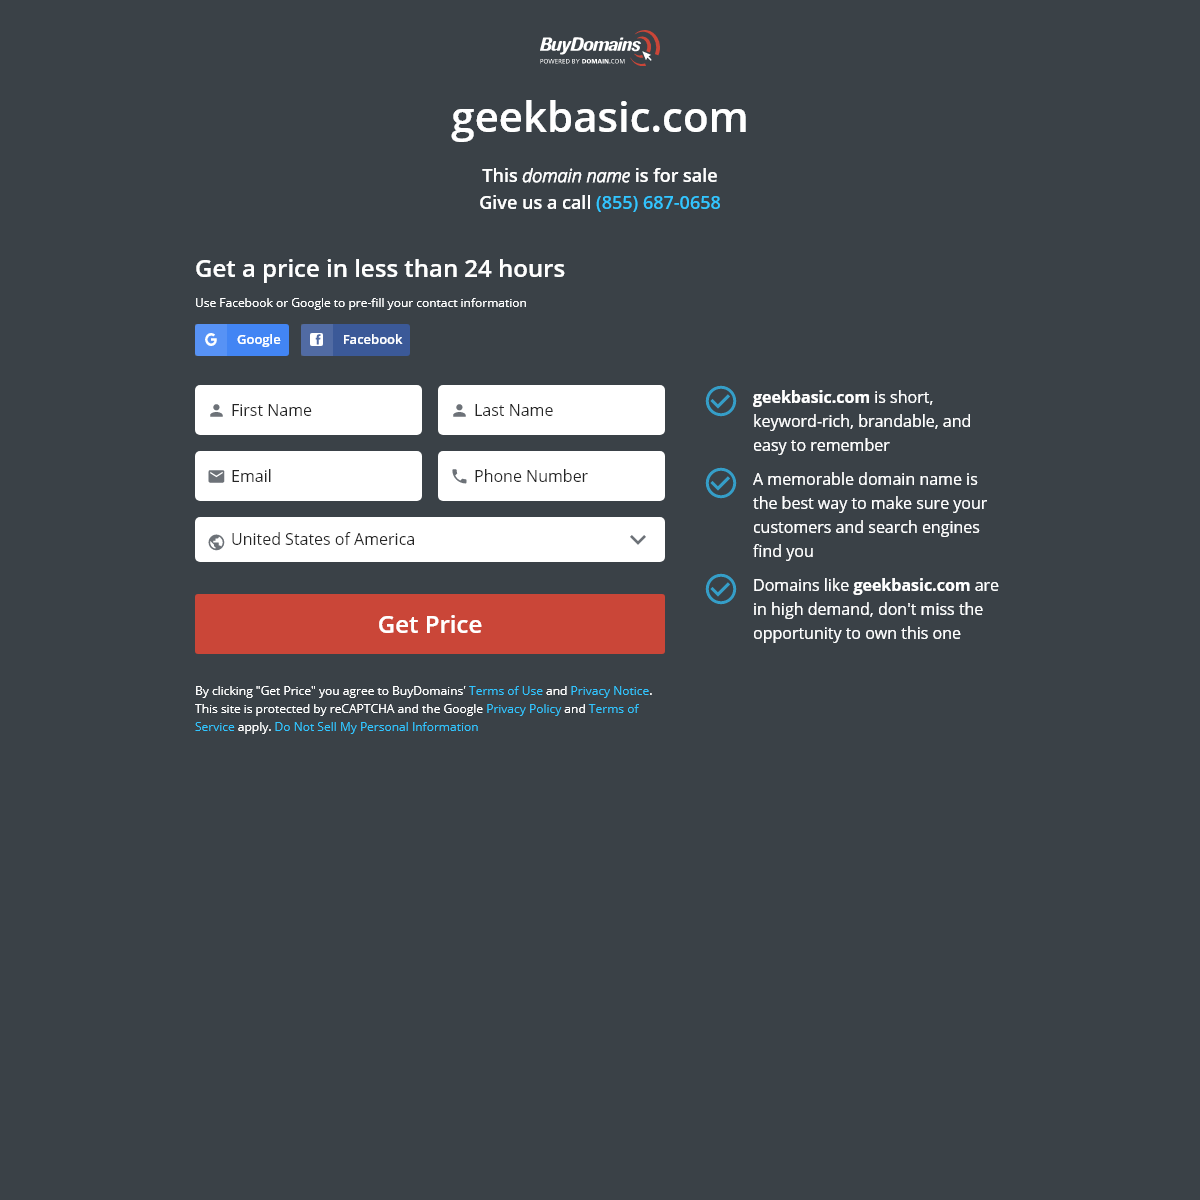 A complete backup of geekbasic.com